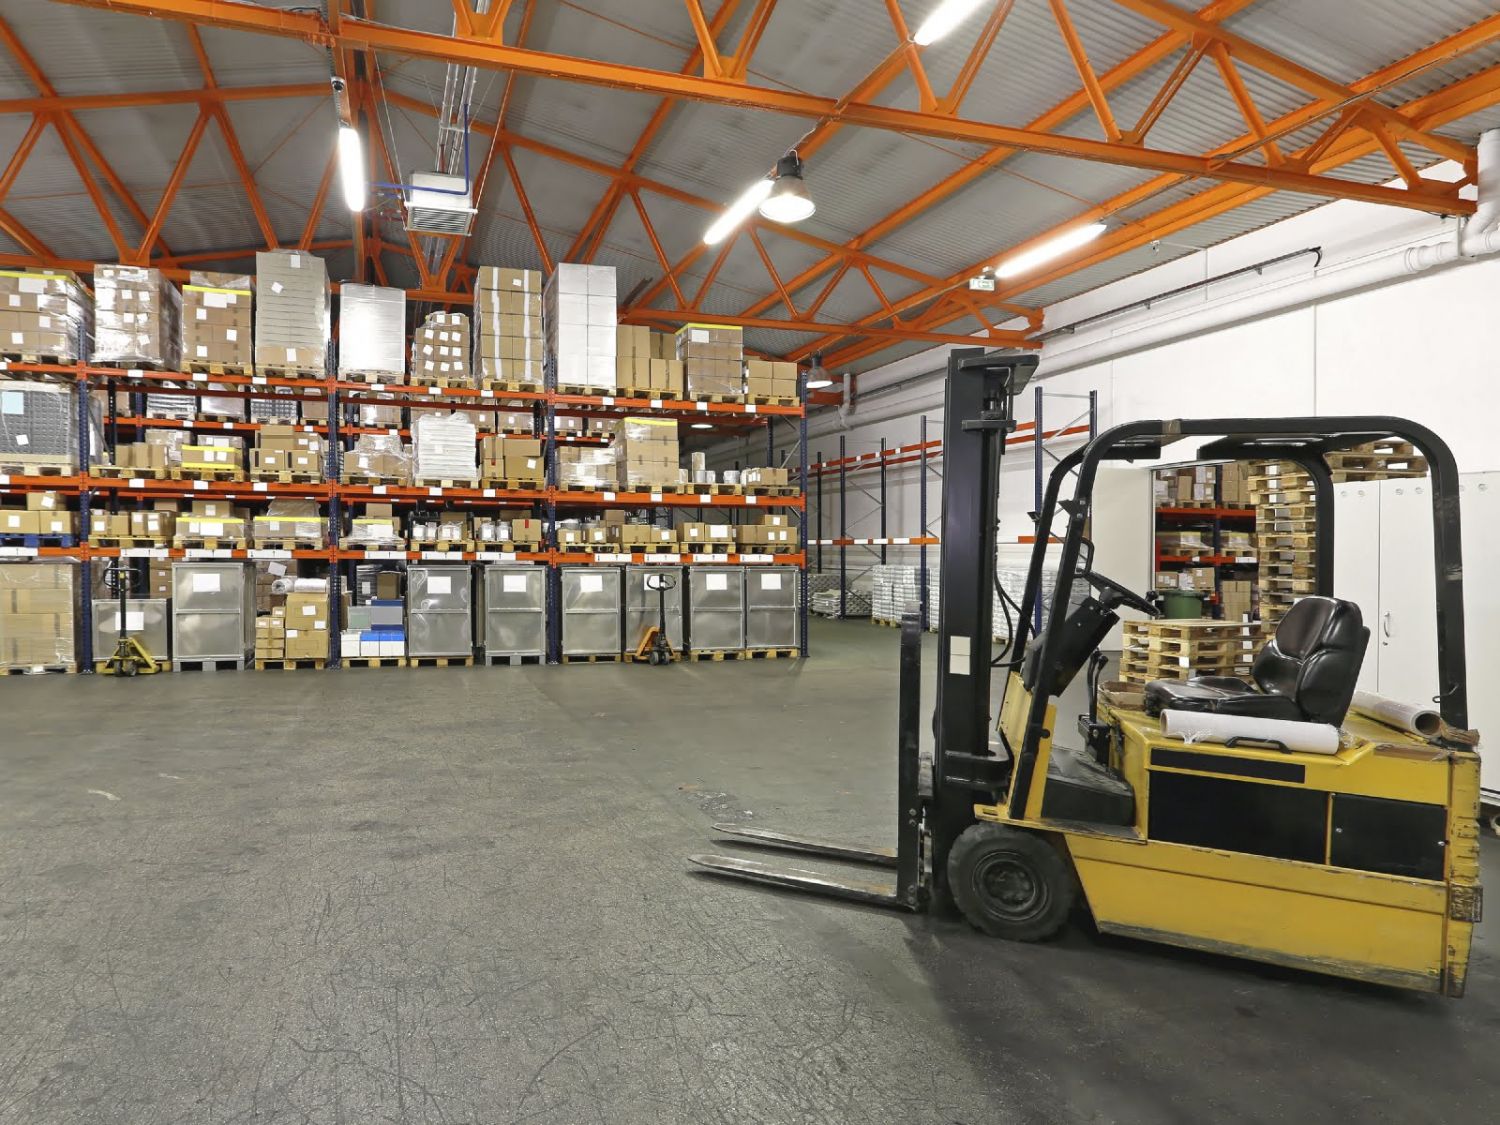 Forklift in front of shelving system at warehouse